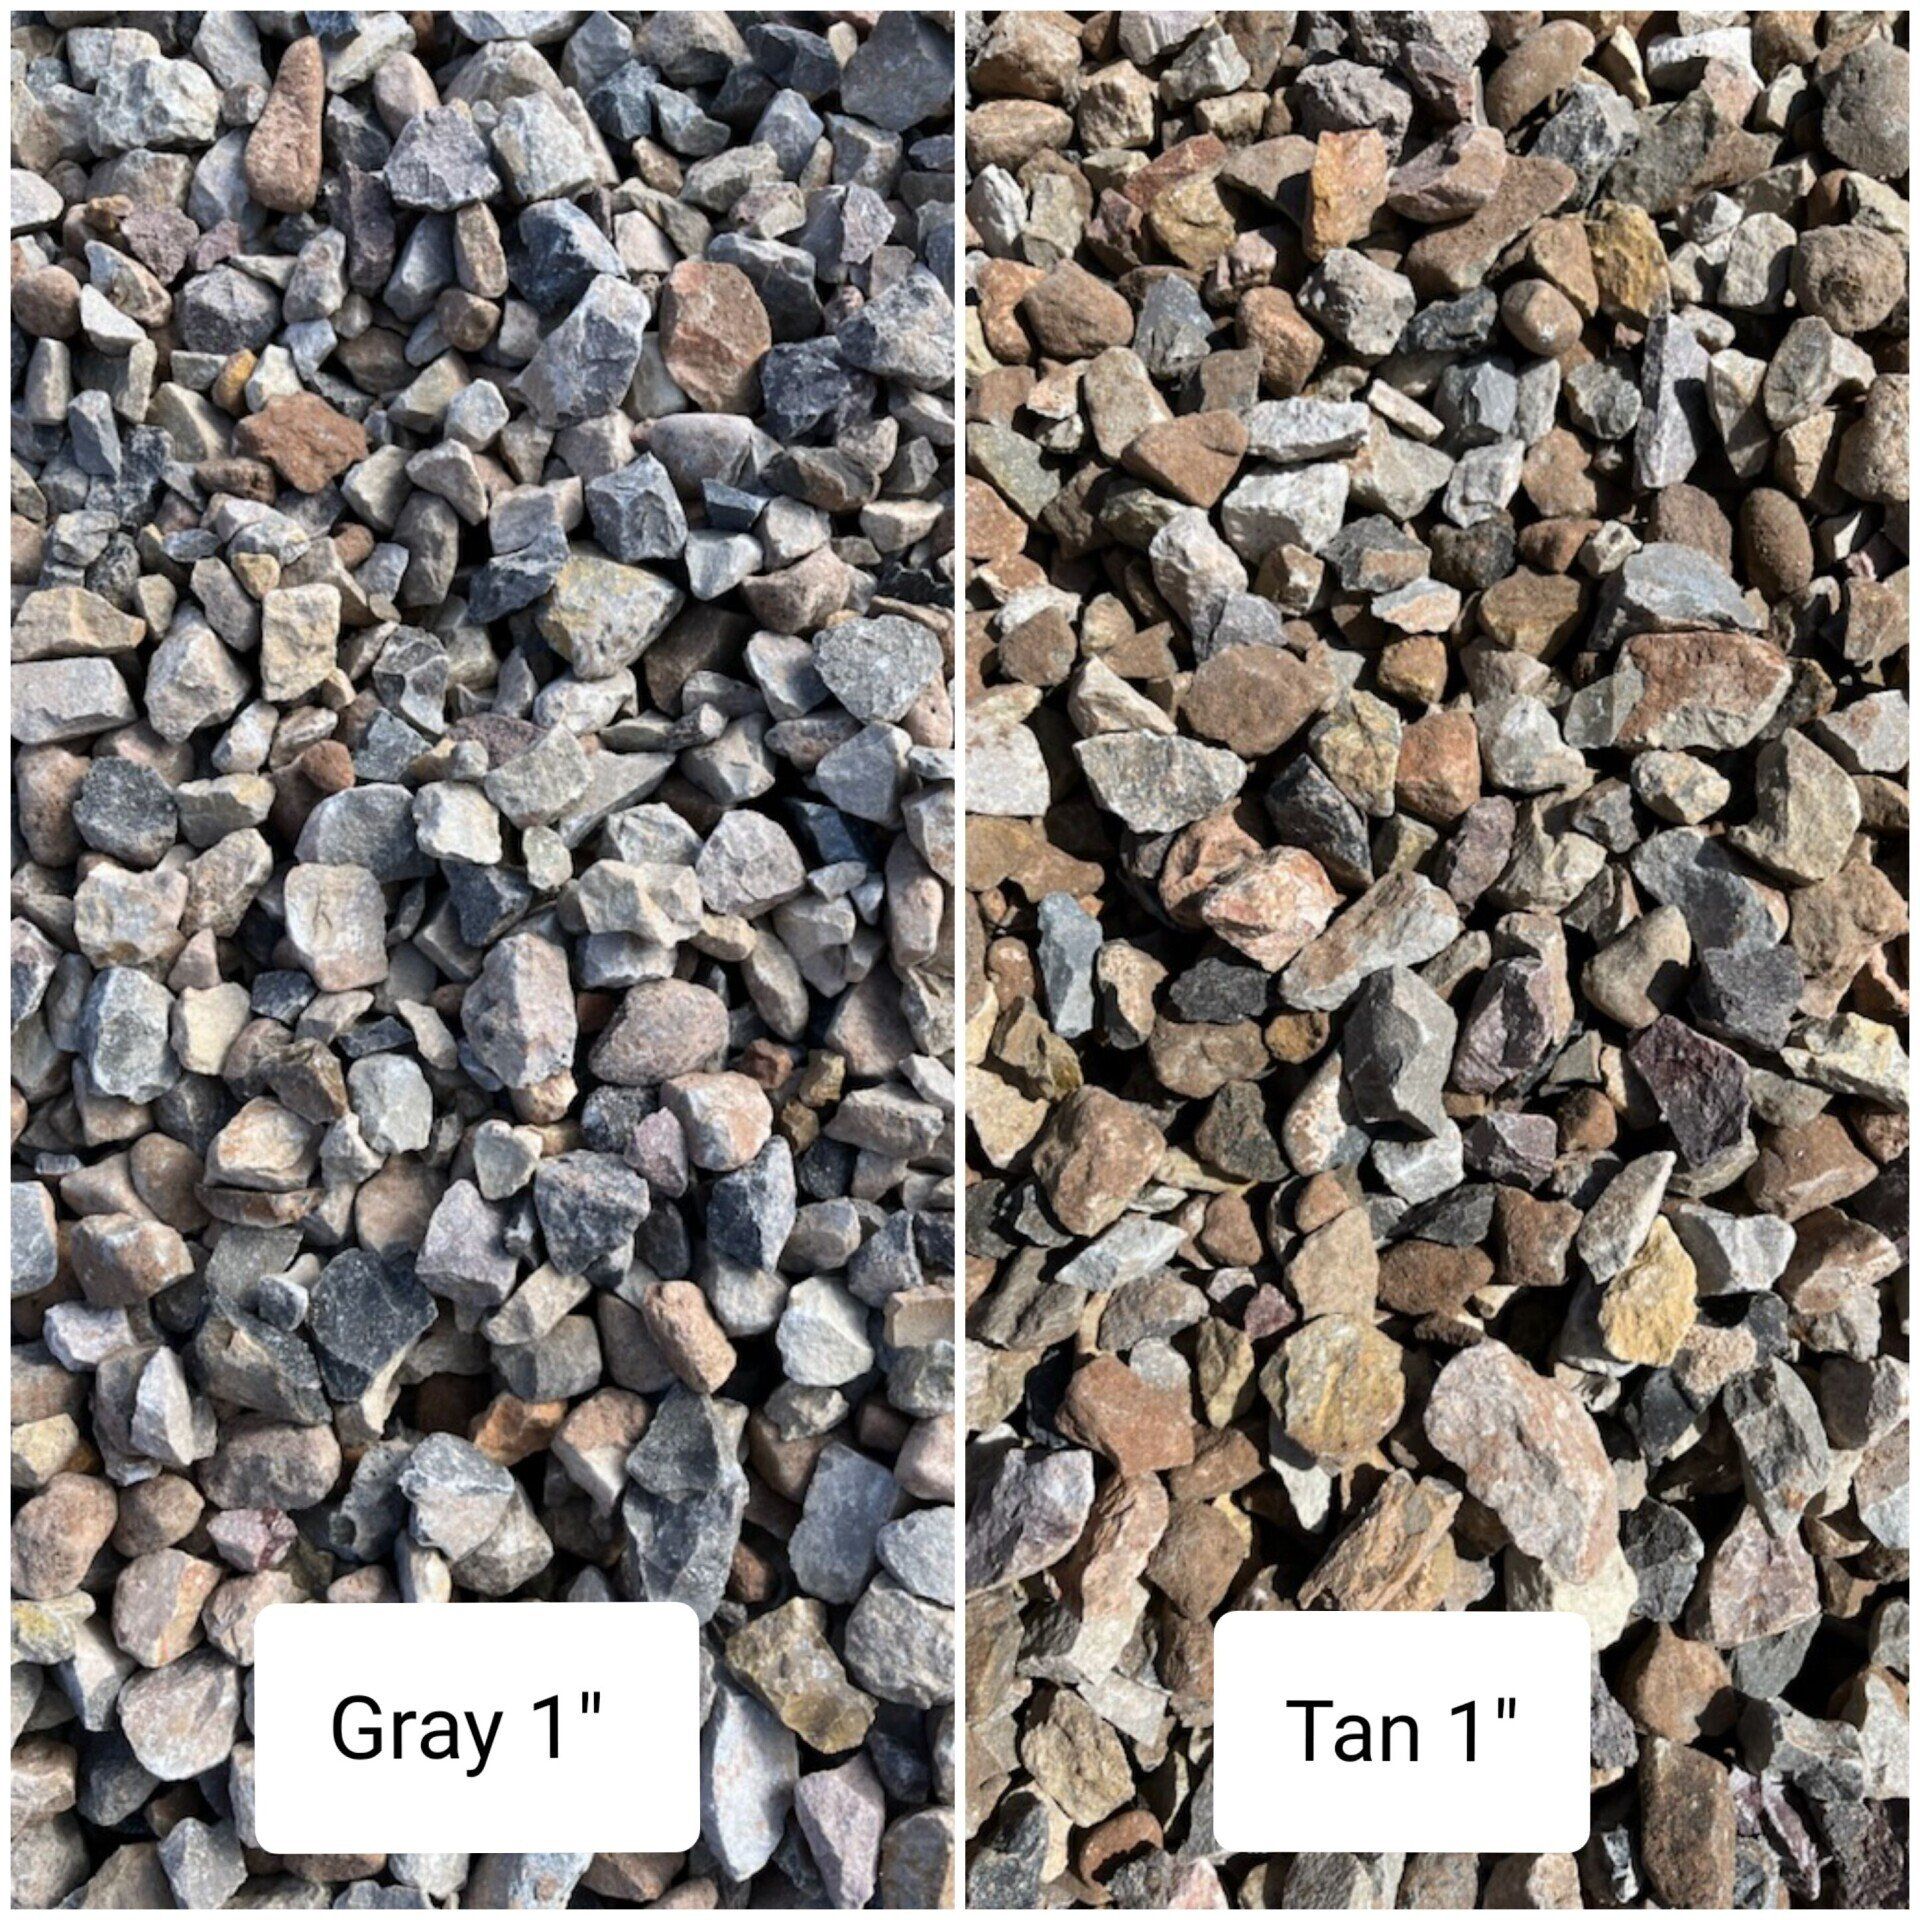 Rock products gravel and cobble rock - Mark's Lawn and Garden Salt Lake City Utah